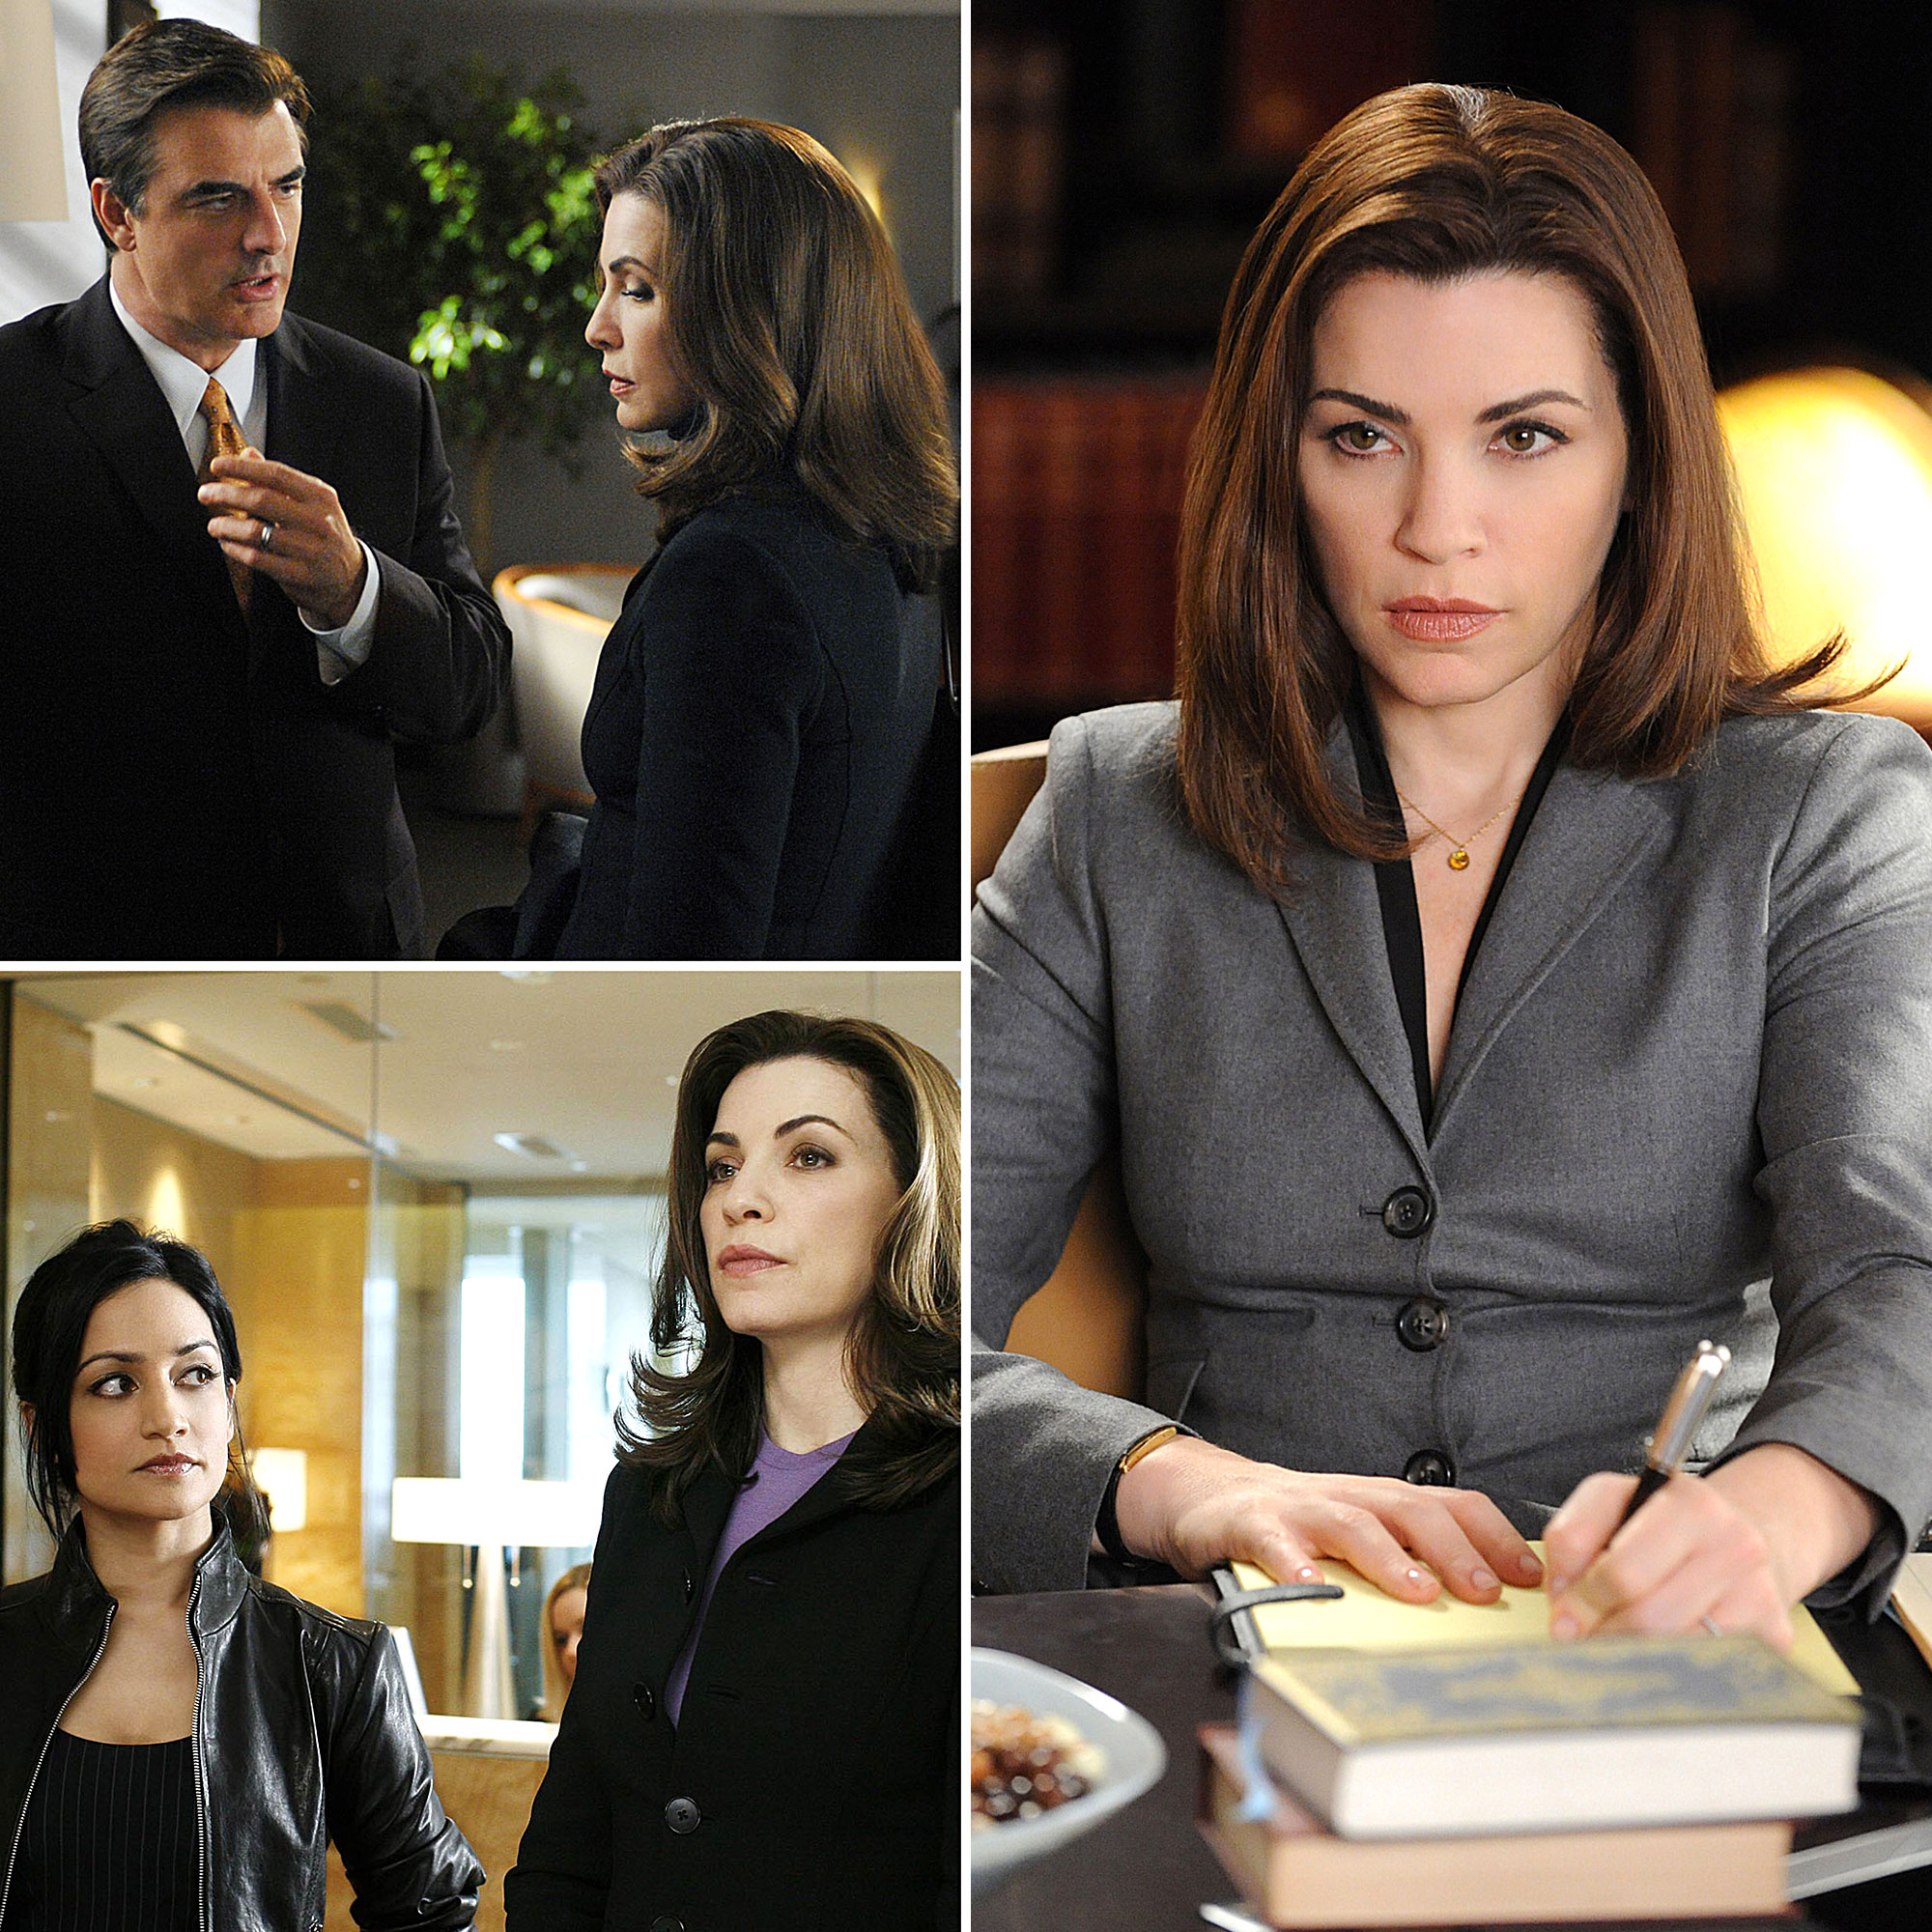 The Good Wife Cast Where Are They Now?